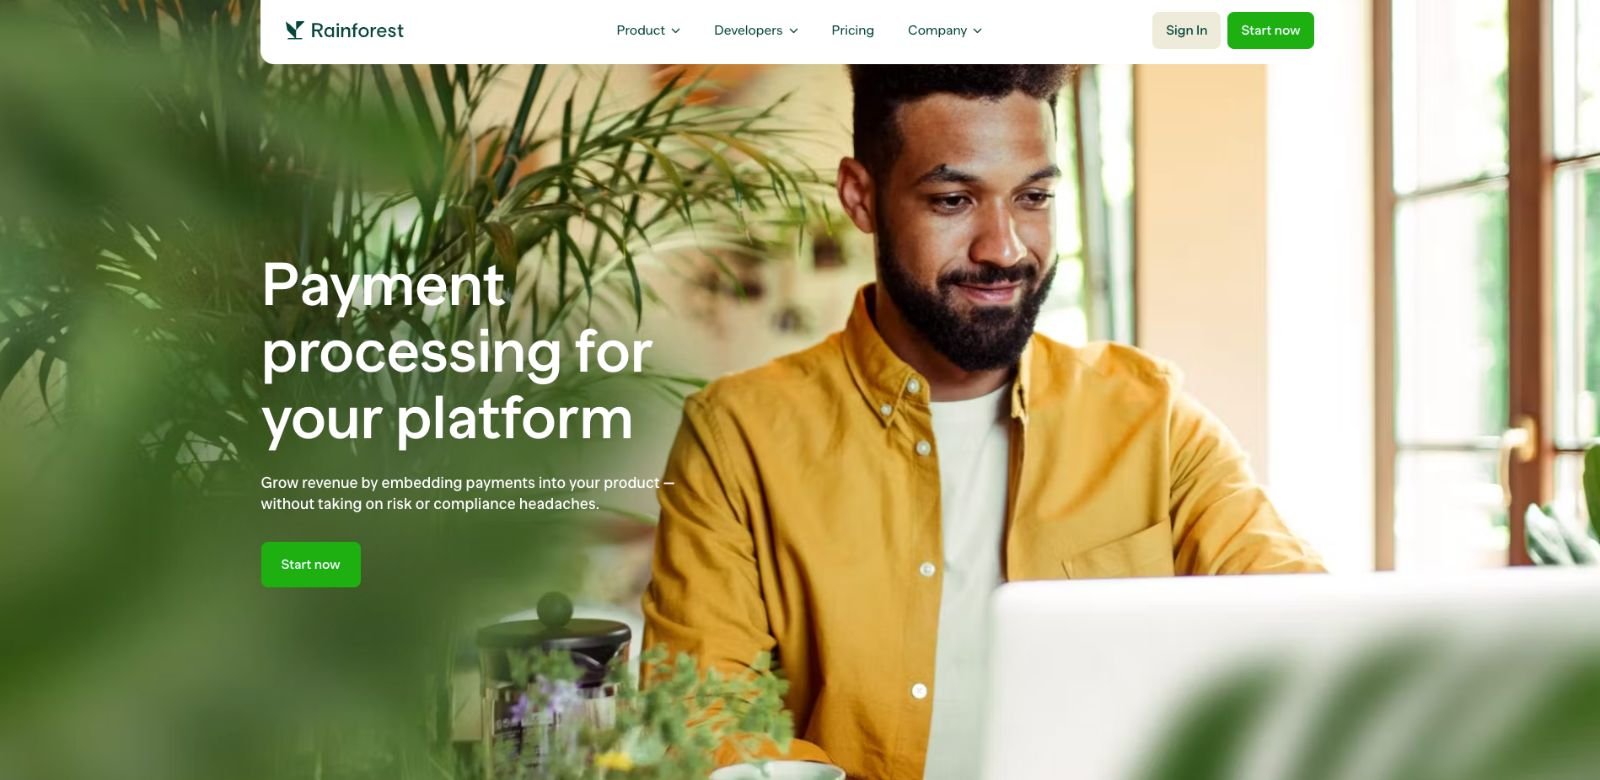 Rainforest Pay's engaging SaaS homepage